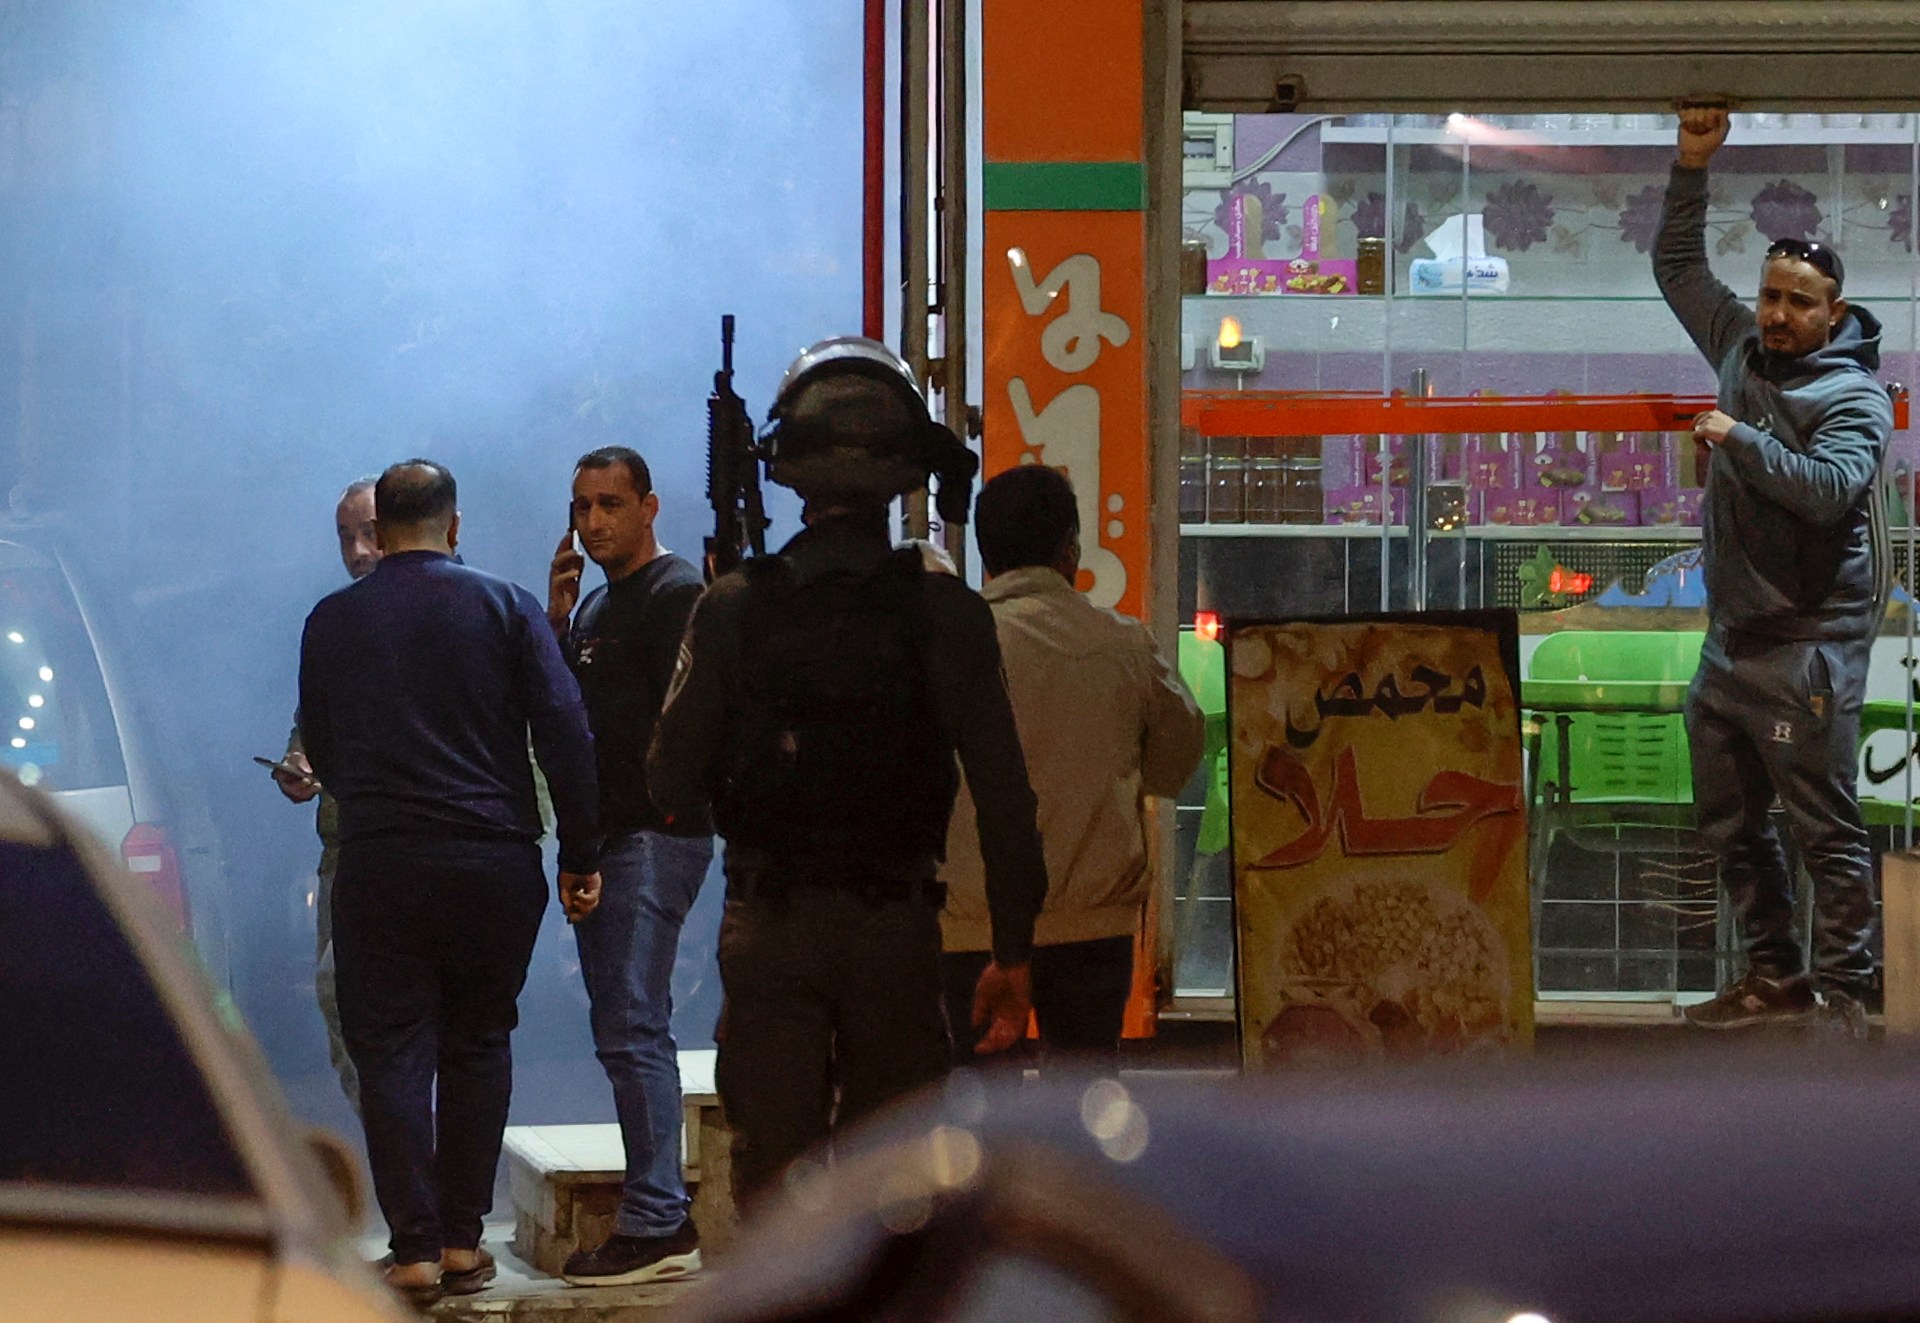 ‘Executed in cold blood’: Palestinians react to public killing | Israel-Palestine conflict News